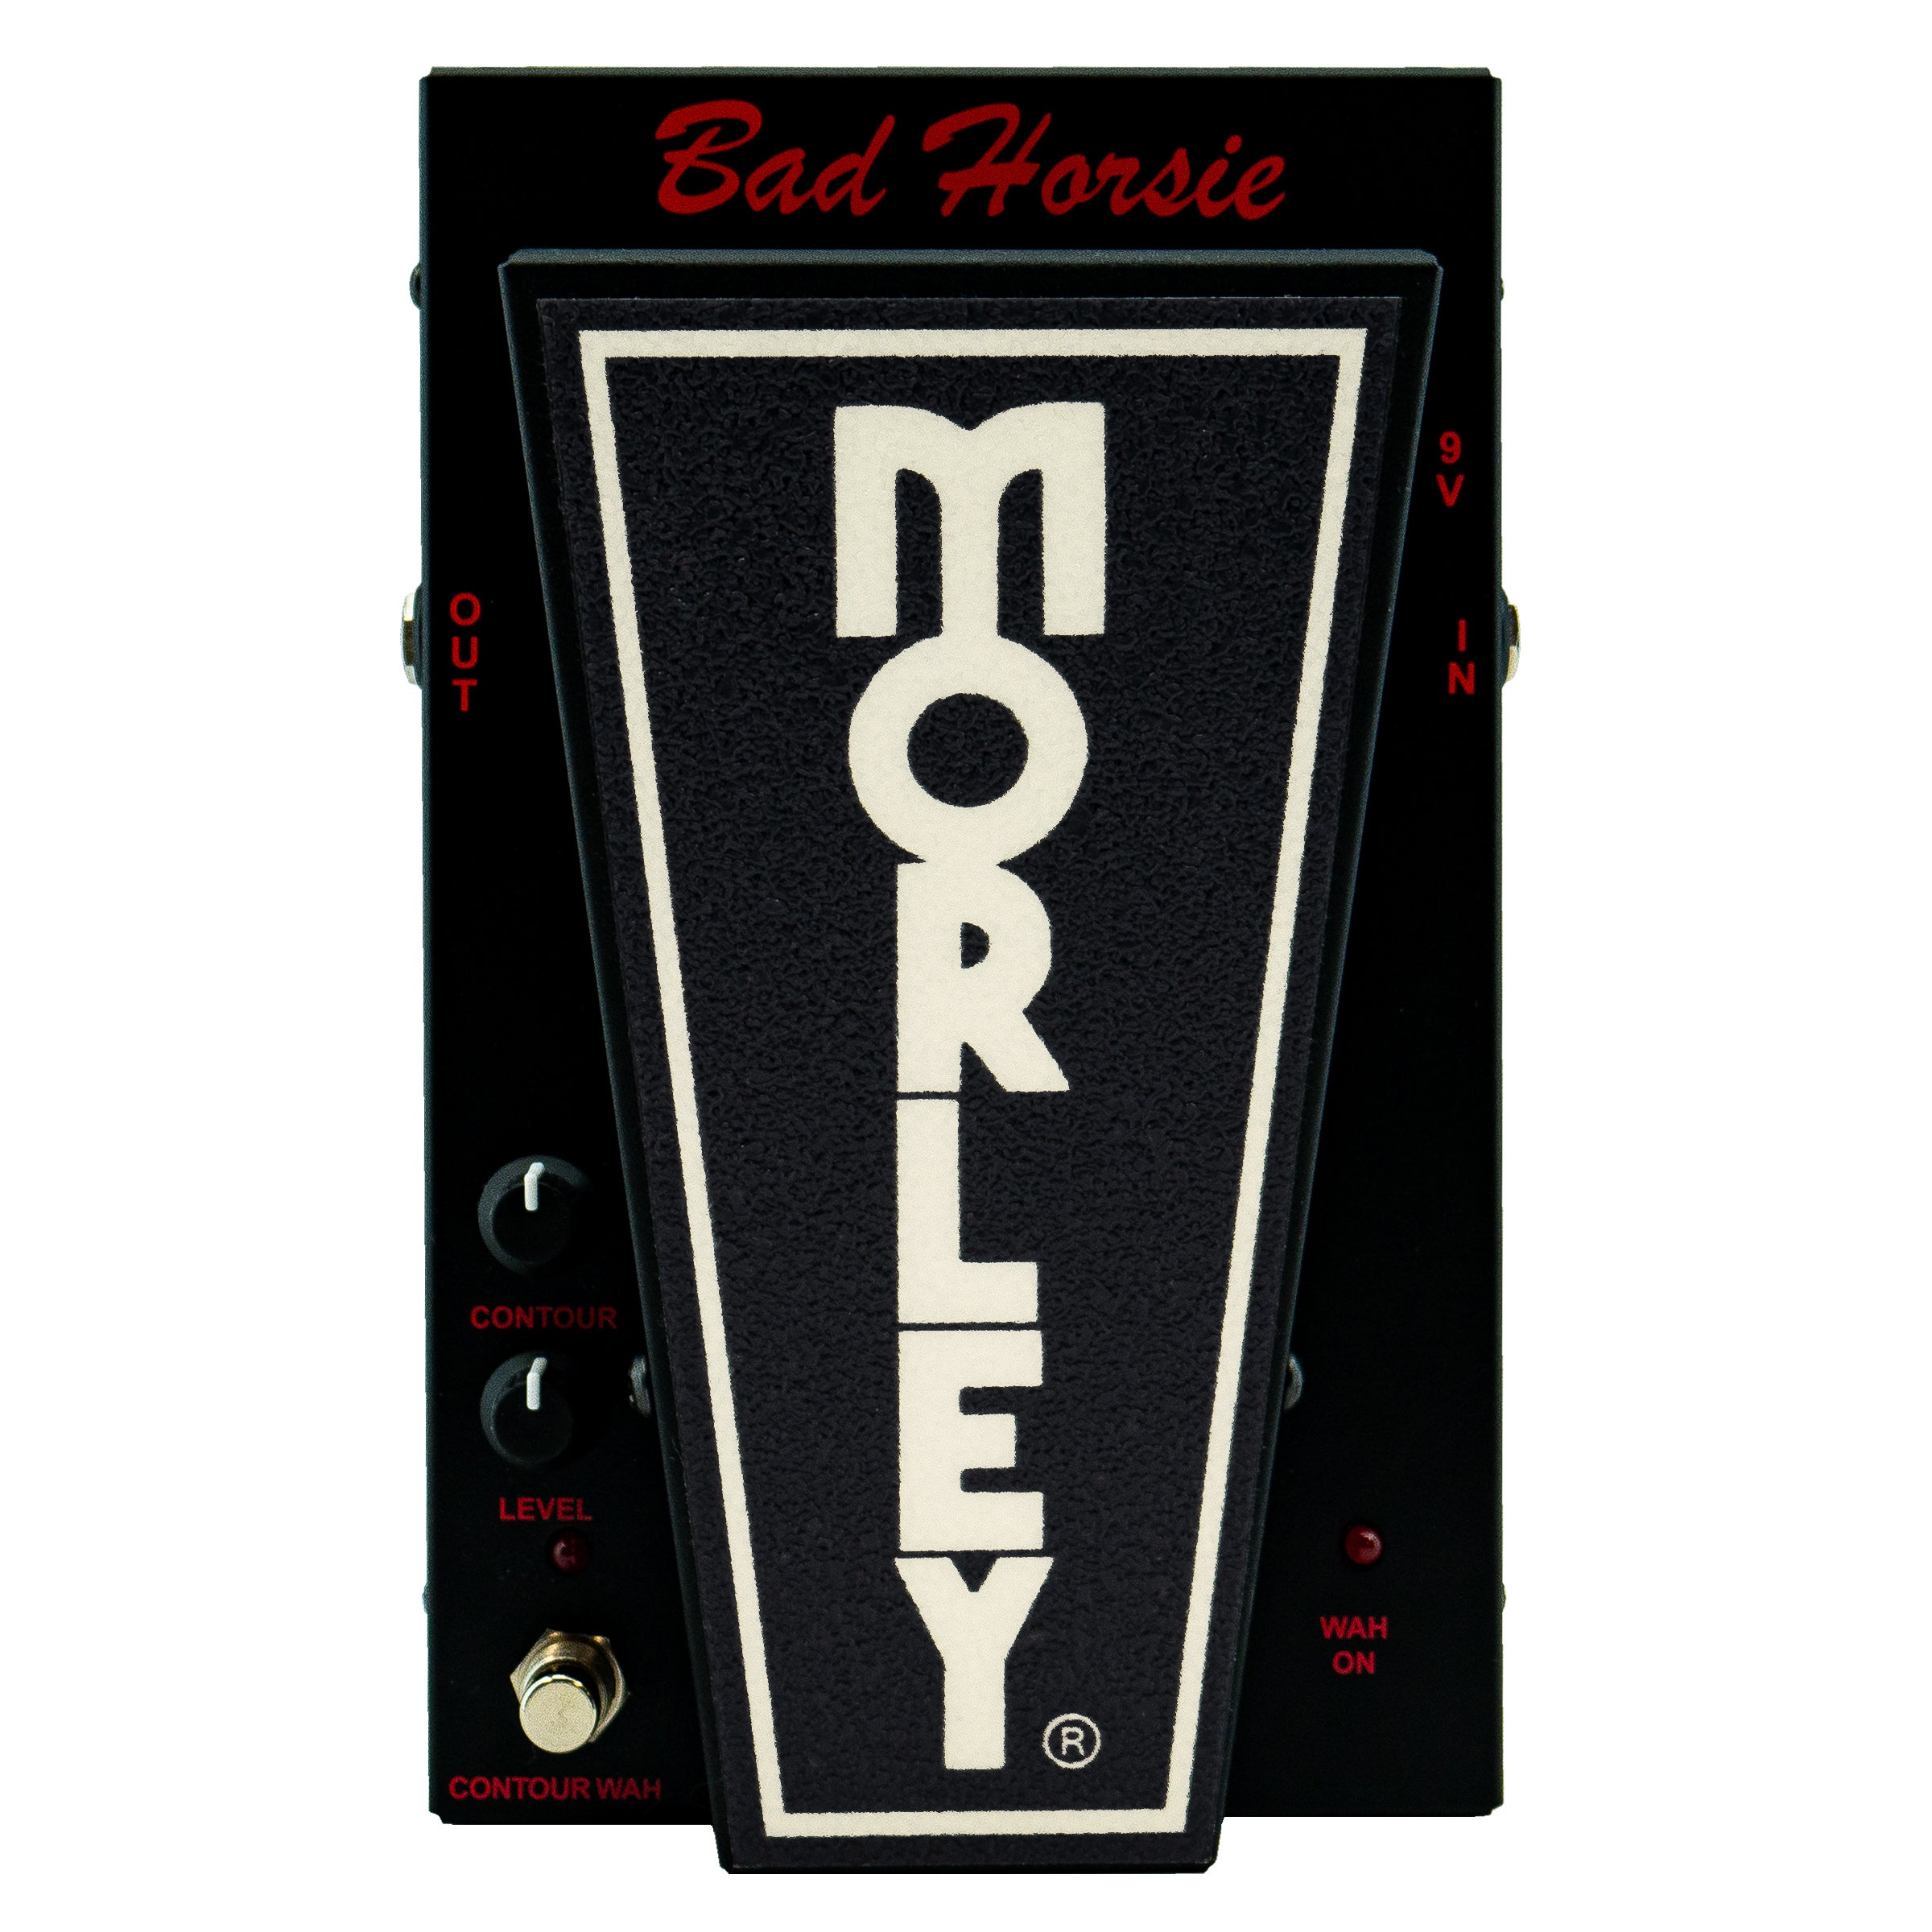 Morley Classic Bad Horsie Wah Guitar Effects Pedal | Music Works